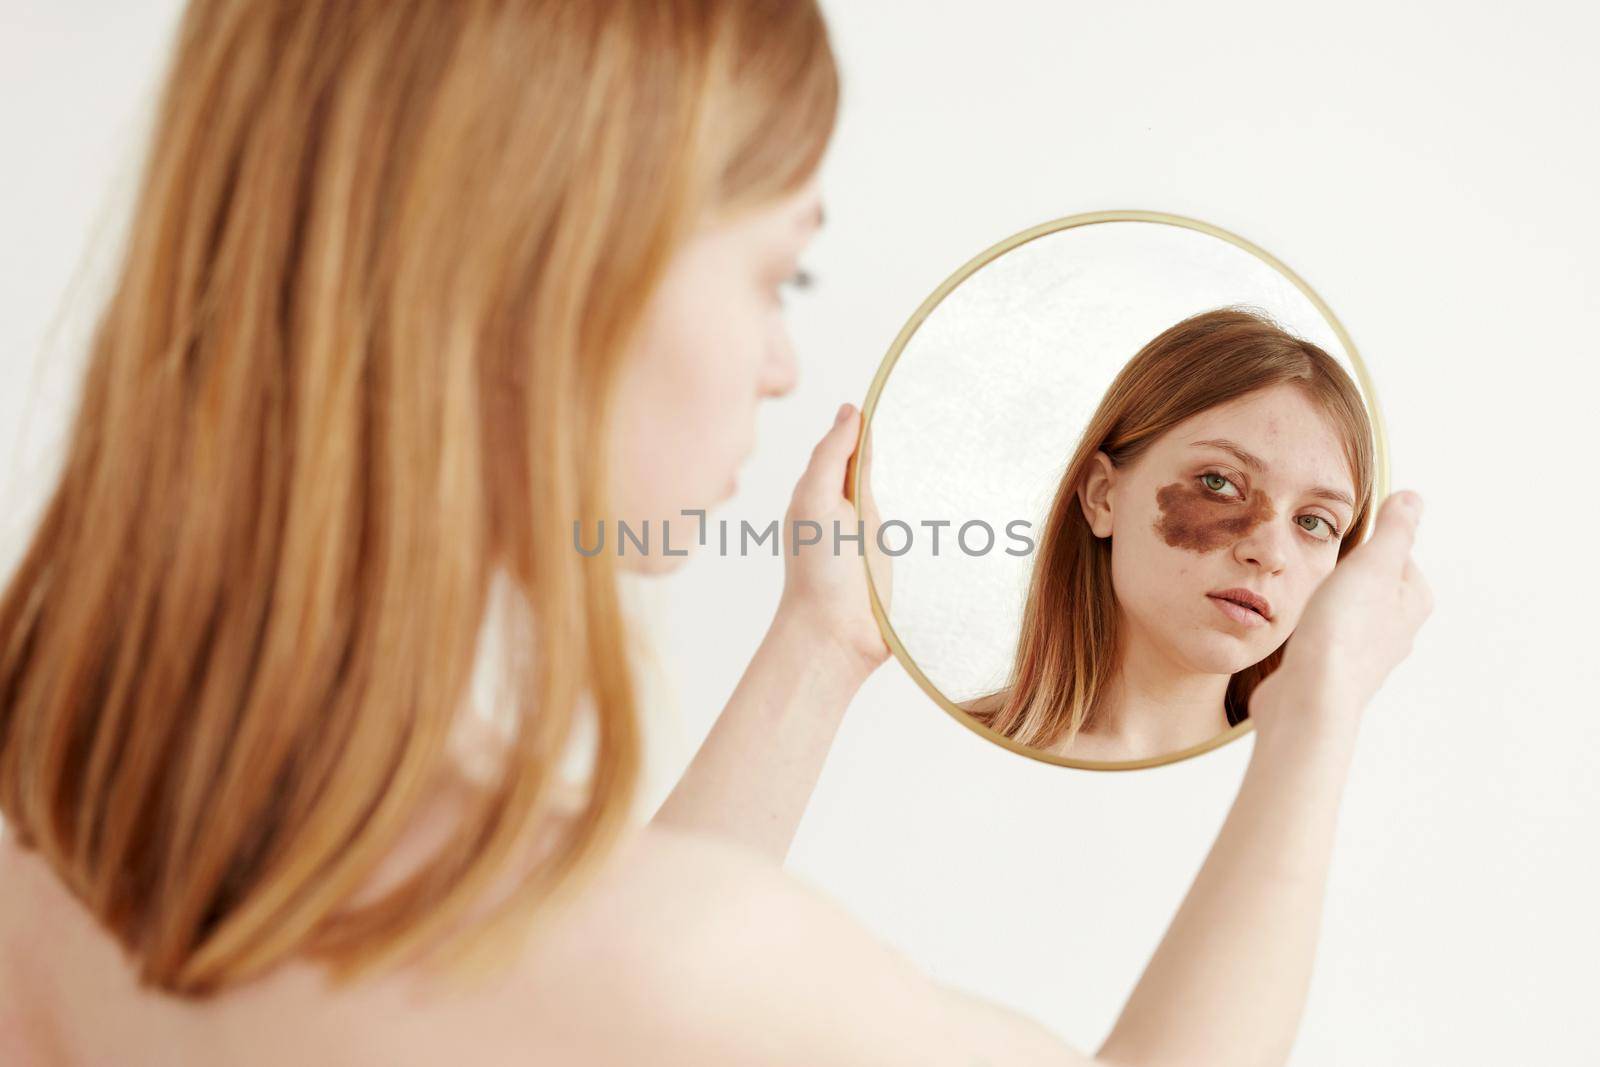 Young female with large brown spot on face under eye looking at mirror reflection against white background